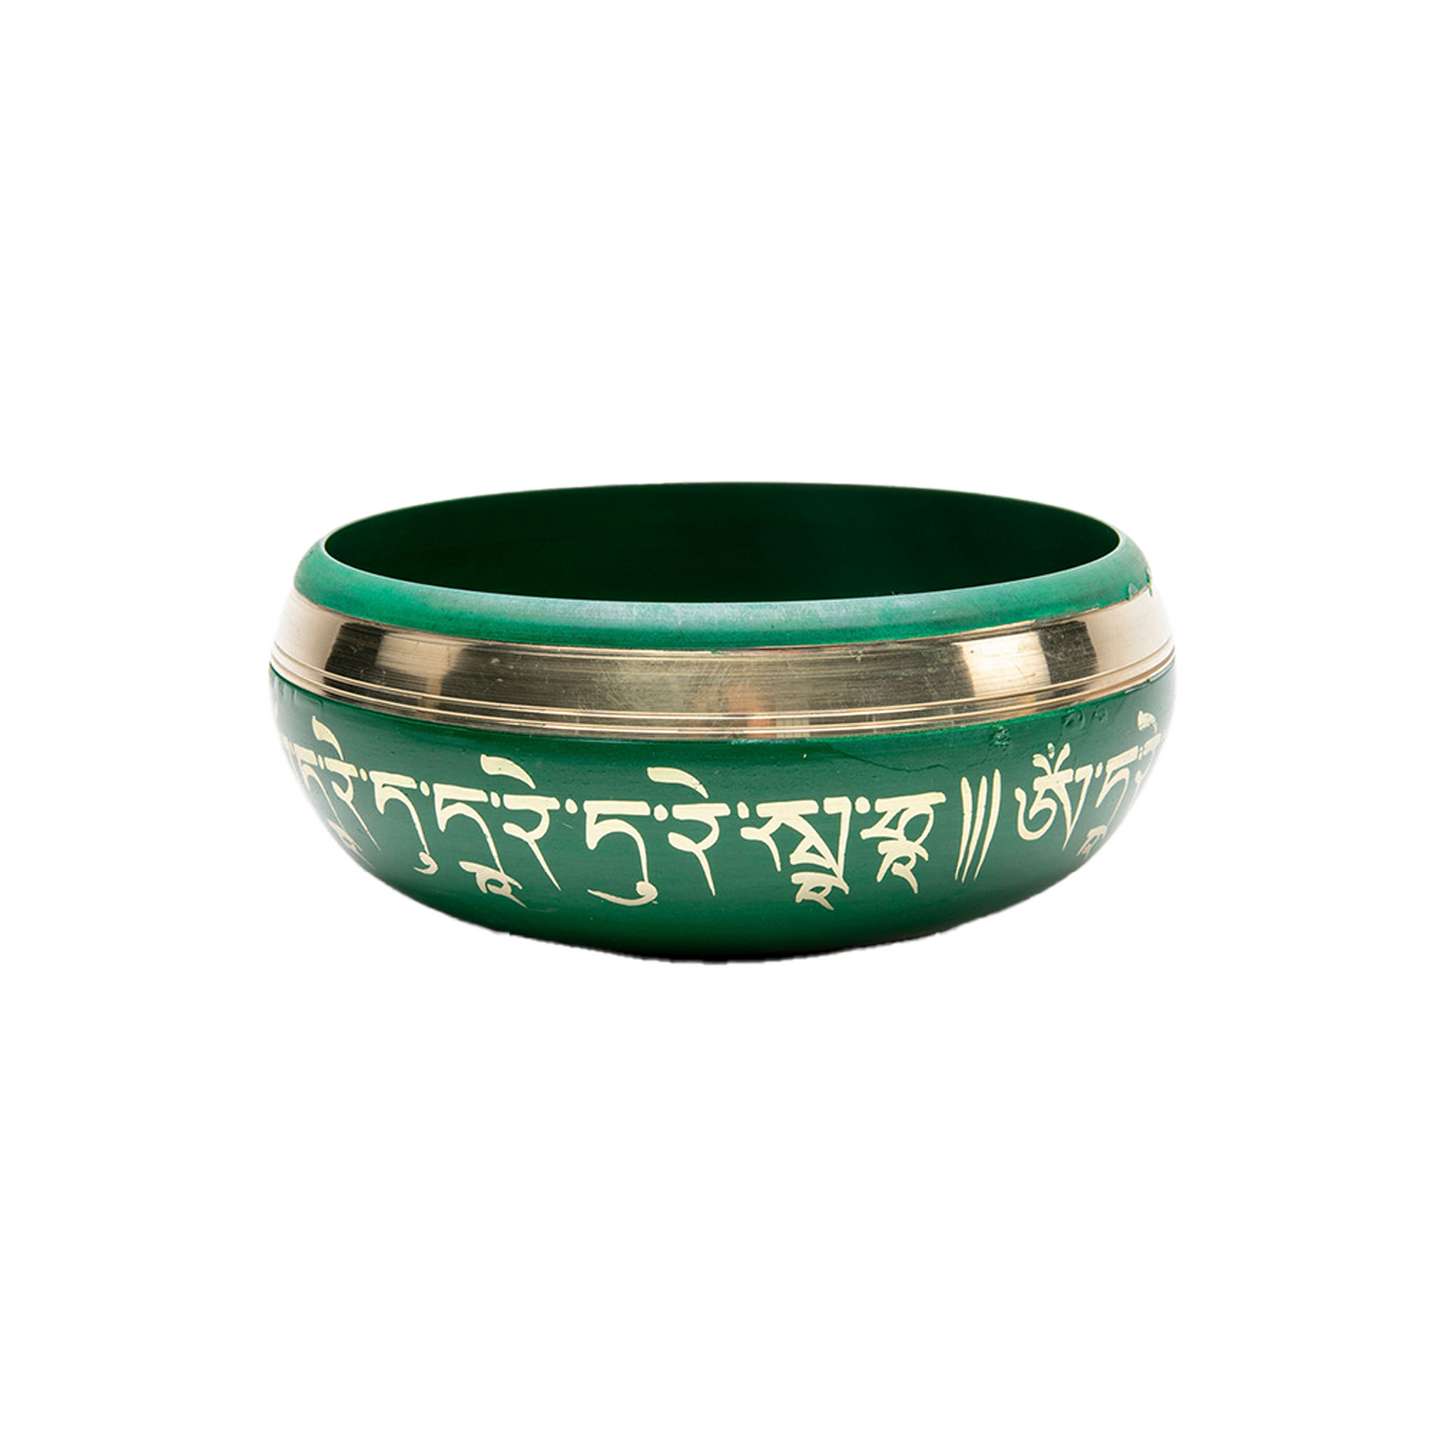 Side angle of just the Green Tara Singing Bowl on a solid white backdrop.